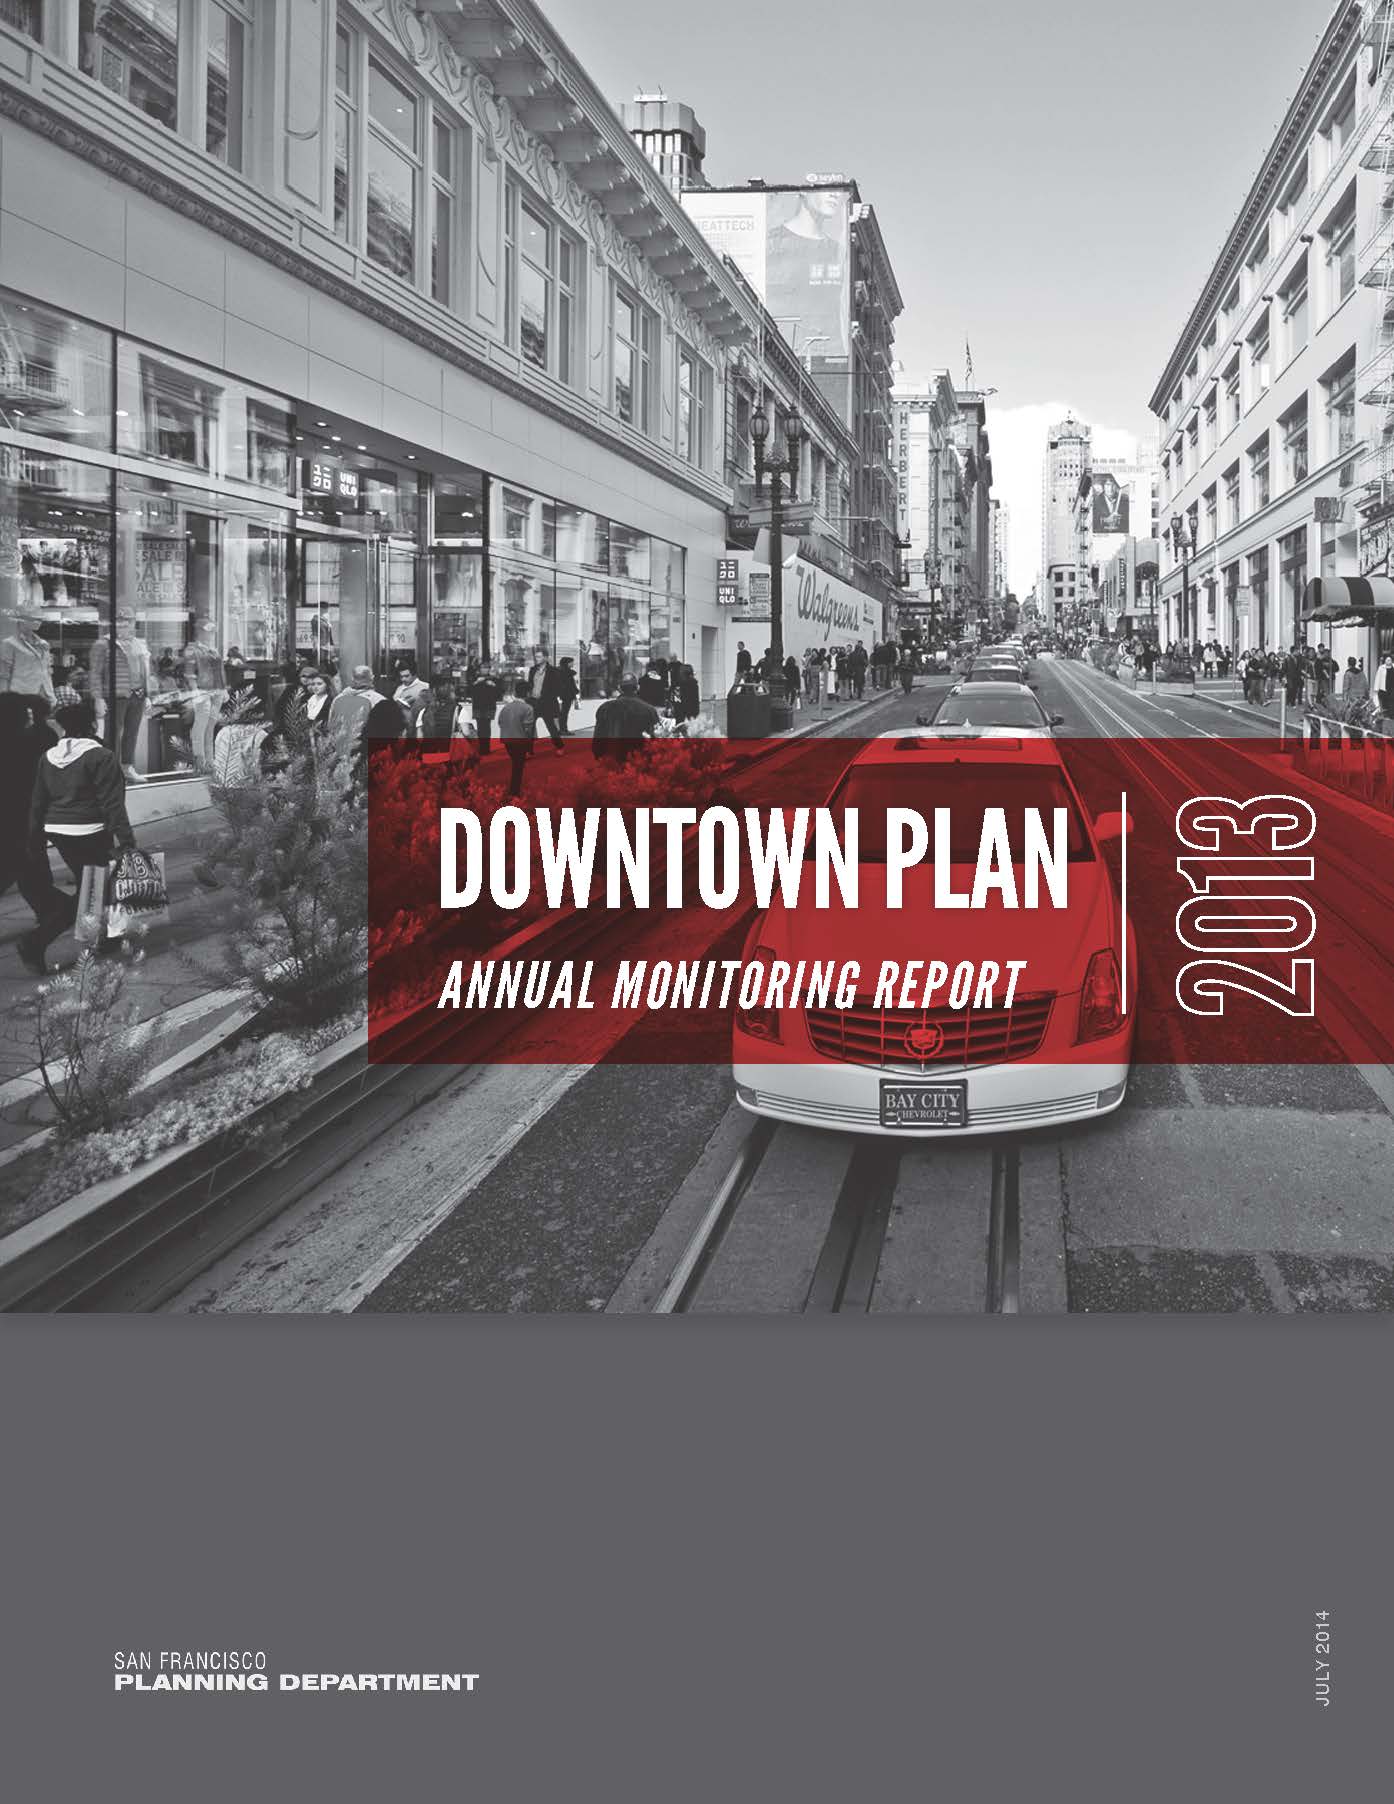 Cover Image for the Downtown Plan Monitoring Report 2013